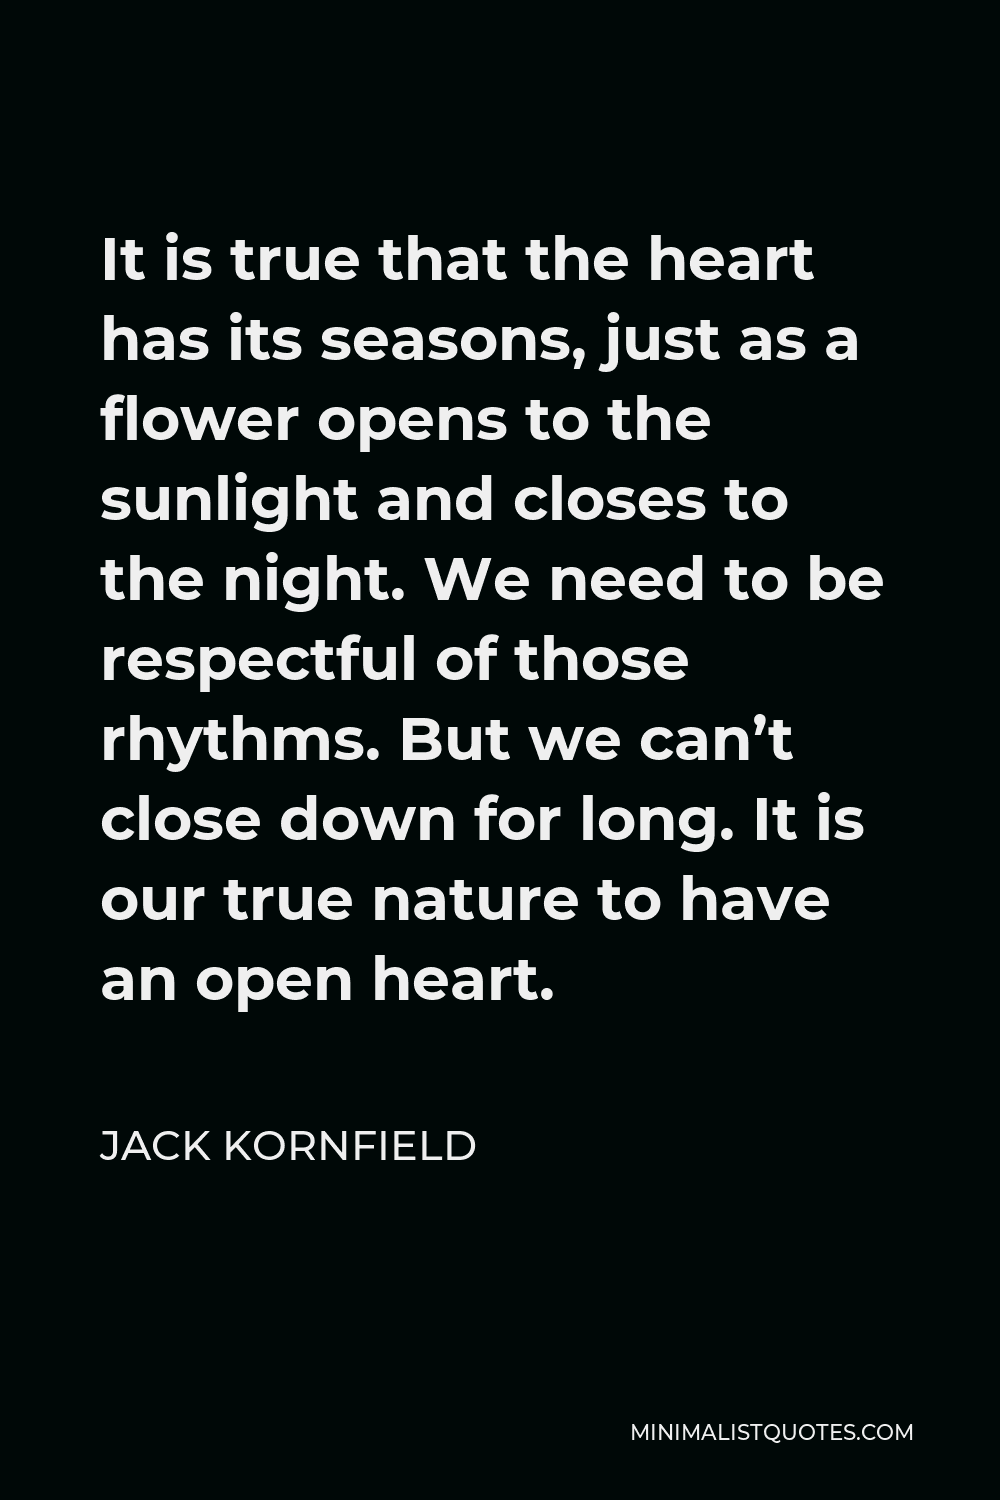 Jack Kornfield Quote - It is true that the heart has its seasons, just as a flower opens to the sunlight and closes to the night. We need to be respectful of those rhythms. But we can’t close down for long. It is our true nature to have an open heart.